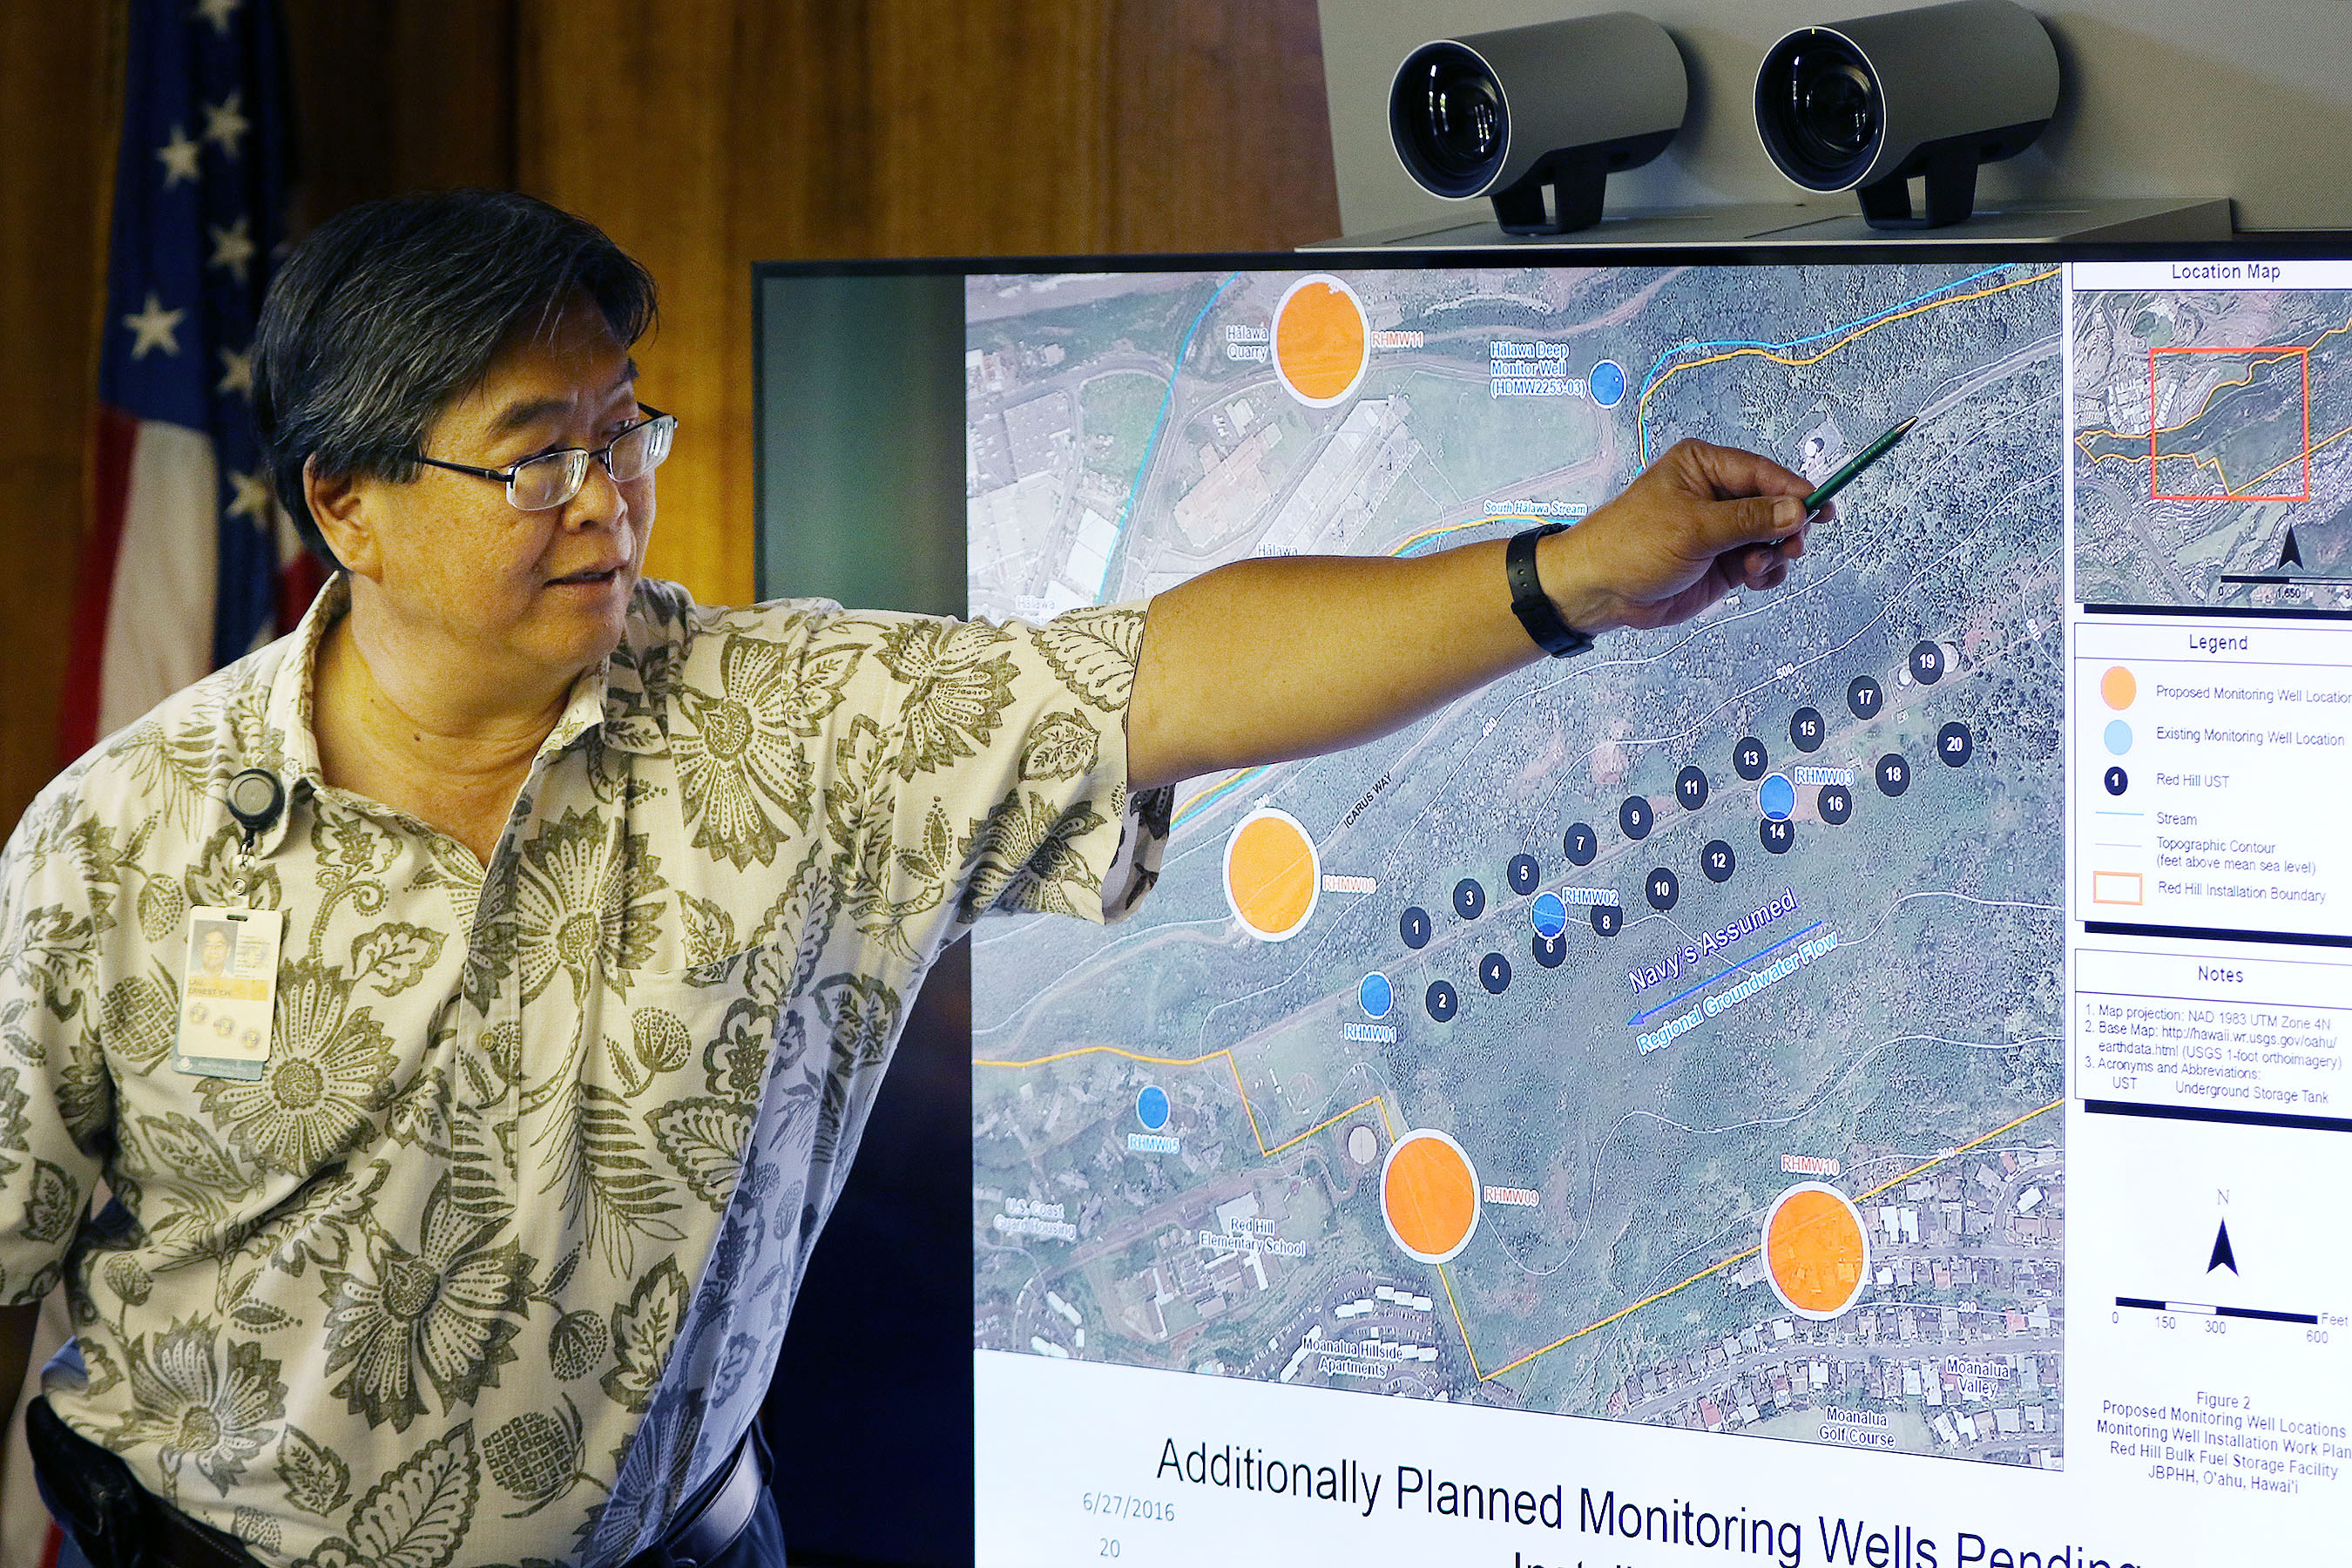 Board of Water Supply Ernest Lau points to areas near the Navy's 20 fuel tanks below Red Hill by the black dot looking things below his left hand during EPA teleconferenced meeting with the BWS board. 28 june 2016